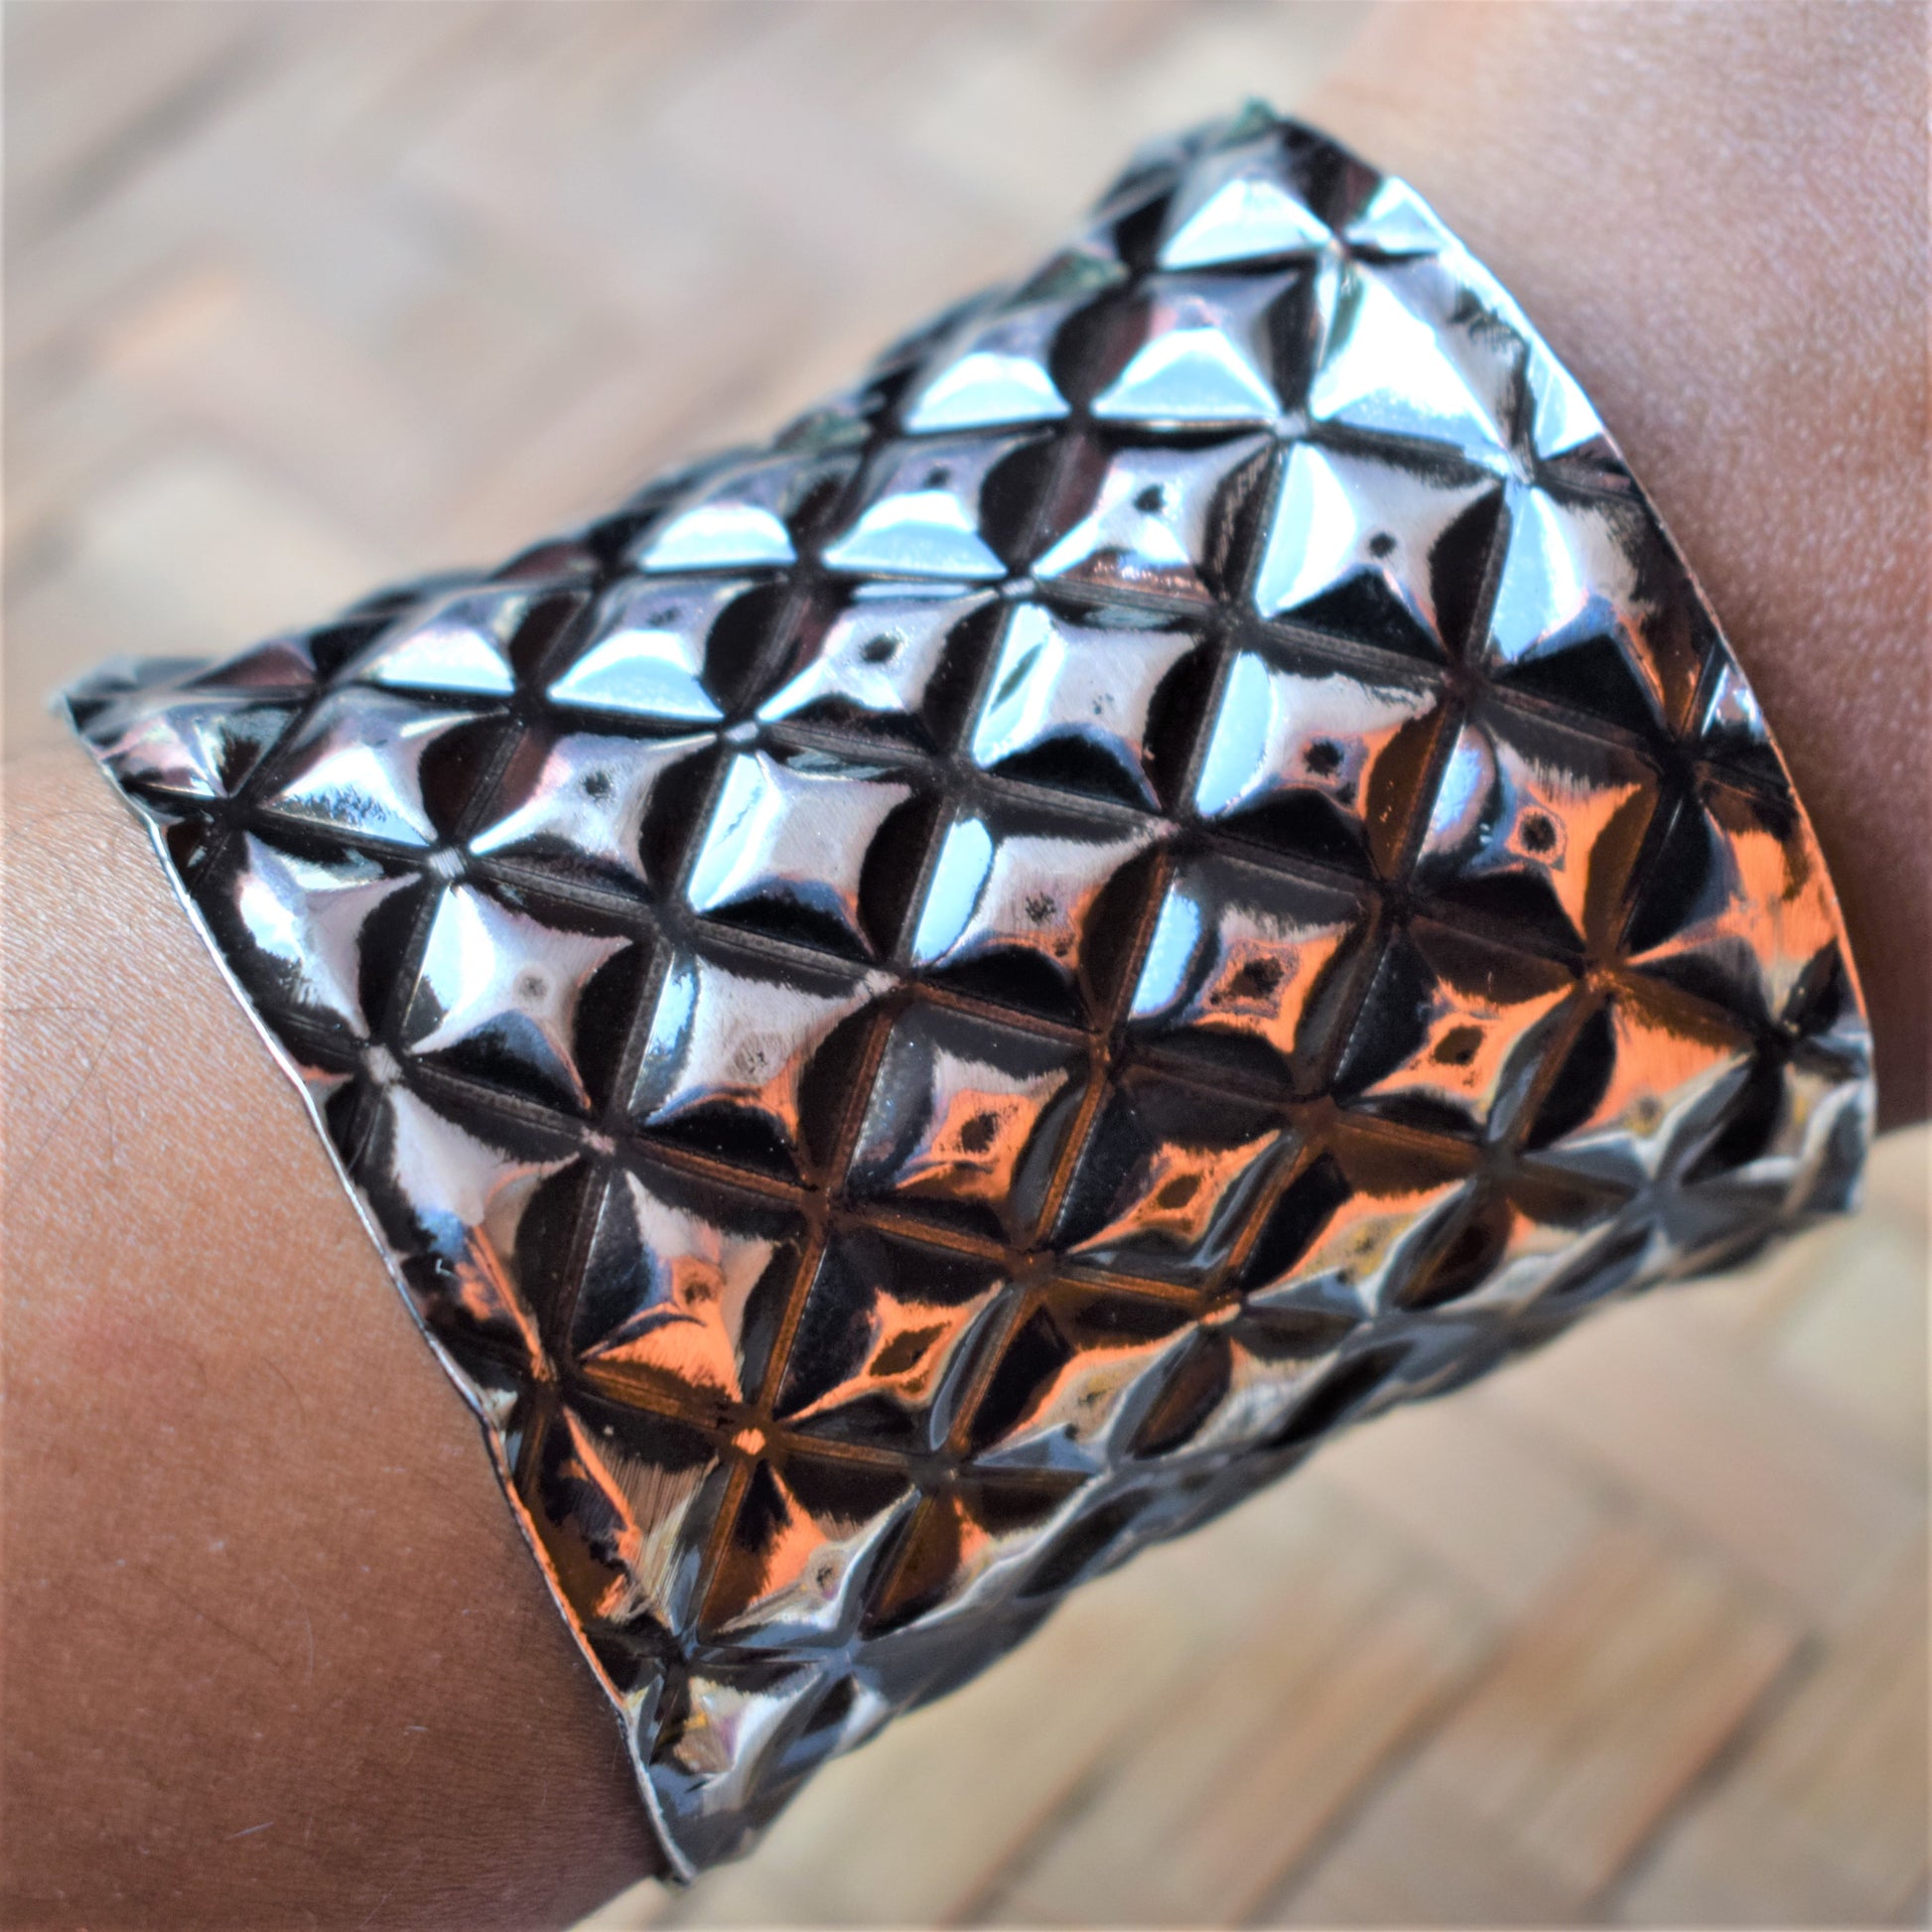 Copper and Silver Oxidised Patterned Embossed Tribal Cuff Bracelet - GlitterGleam